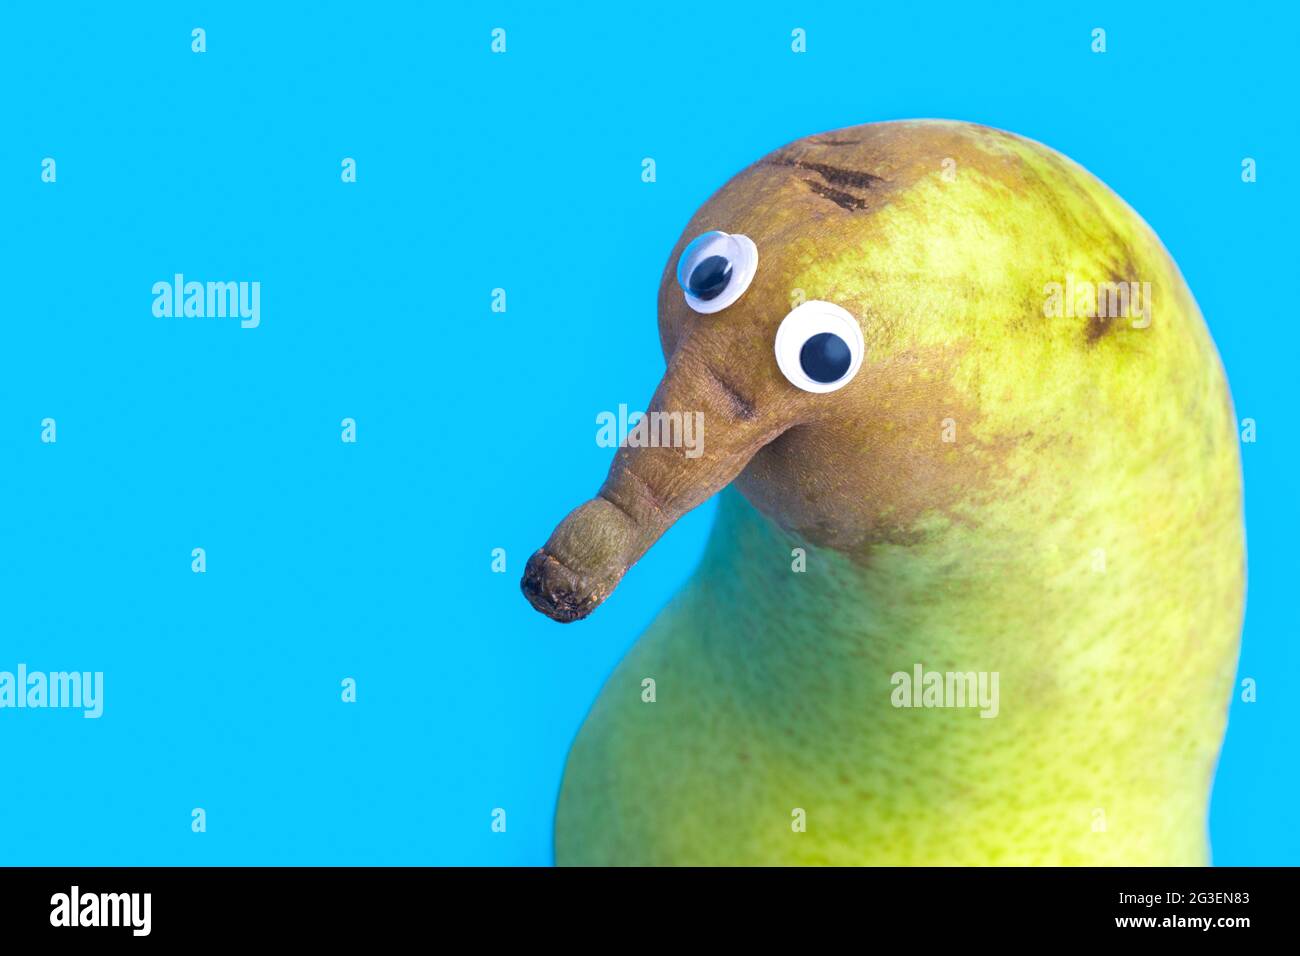 Funny pear character making puppy eyes isolated on blue Stock Photo